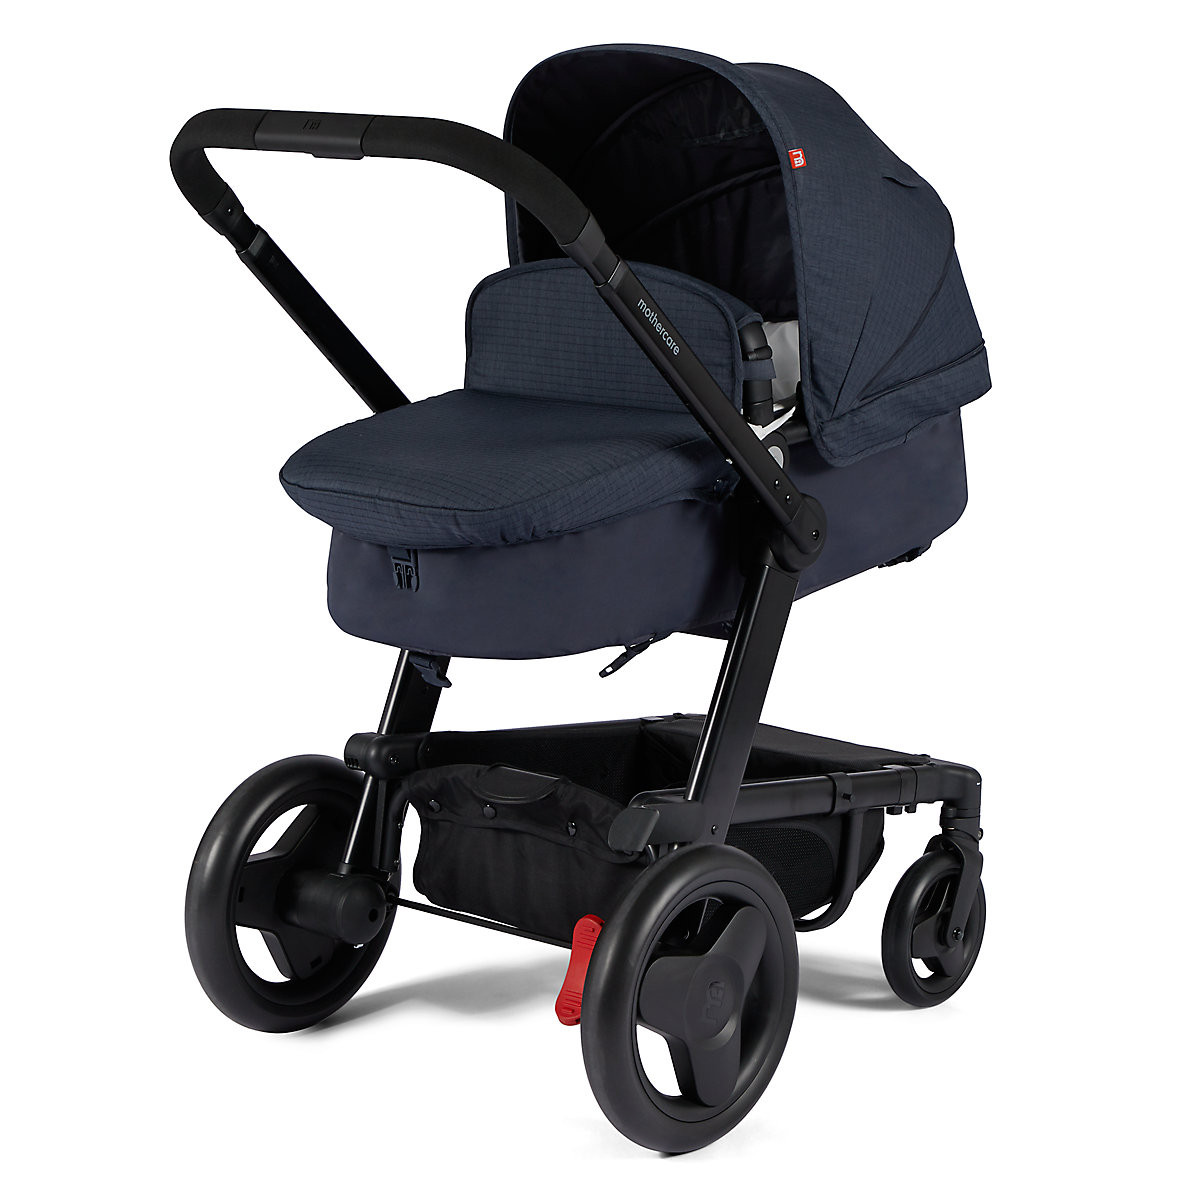 mothercare genie double pushchair